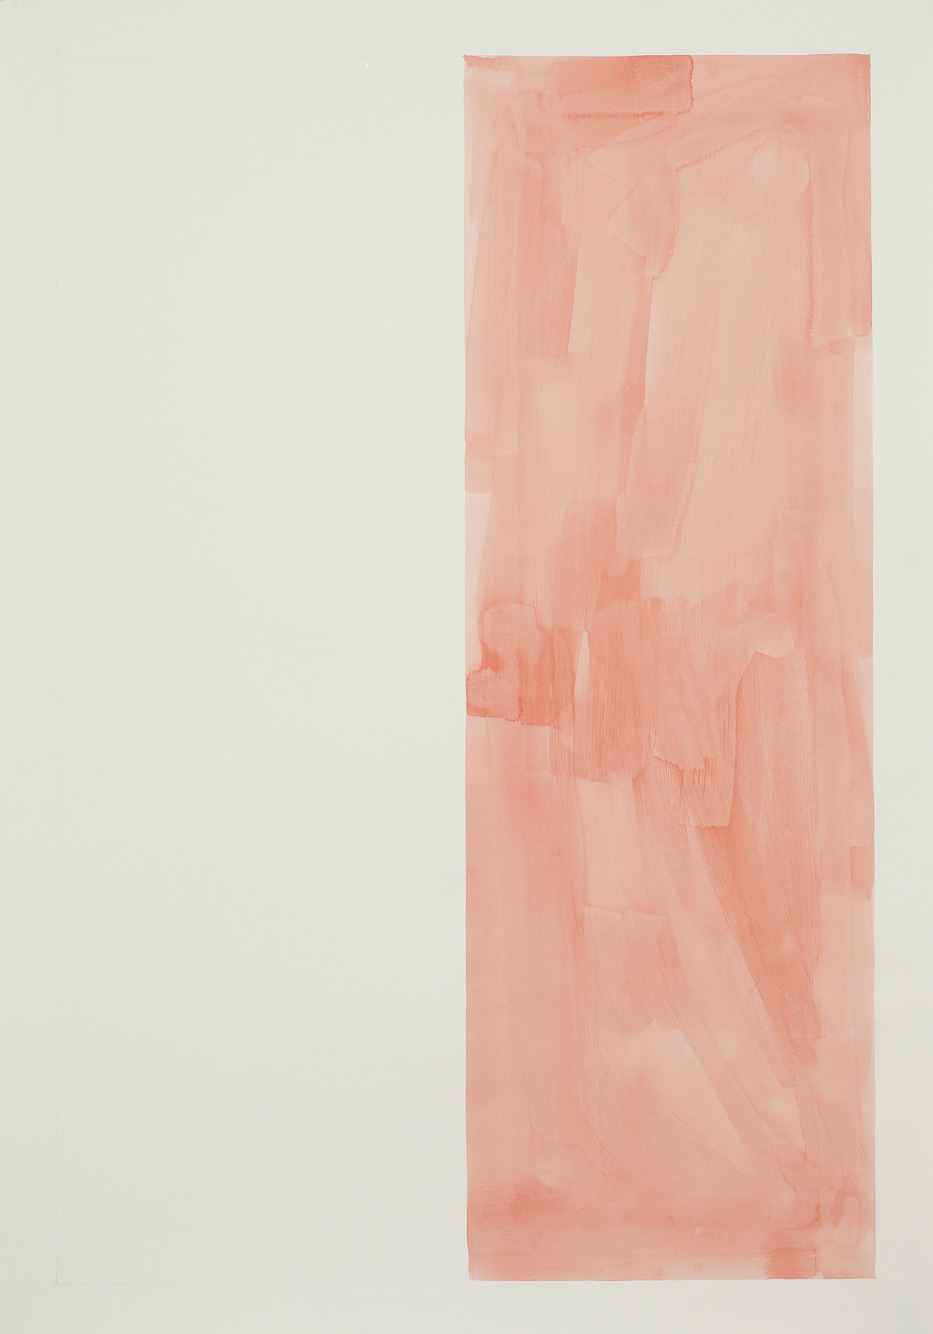 untitled, 2016, watercolor on paper (from the series Monochrome Watercolors), 140×100cm